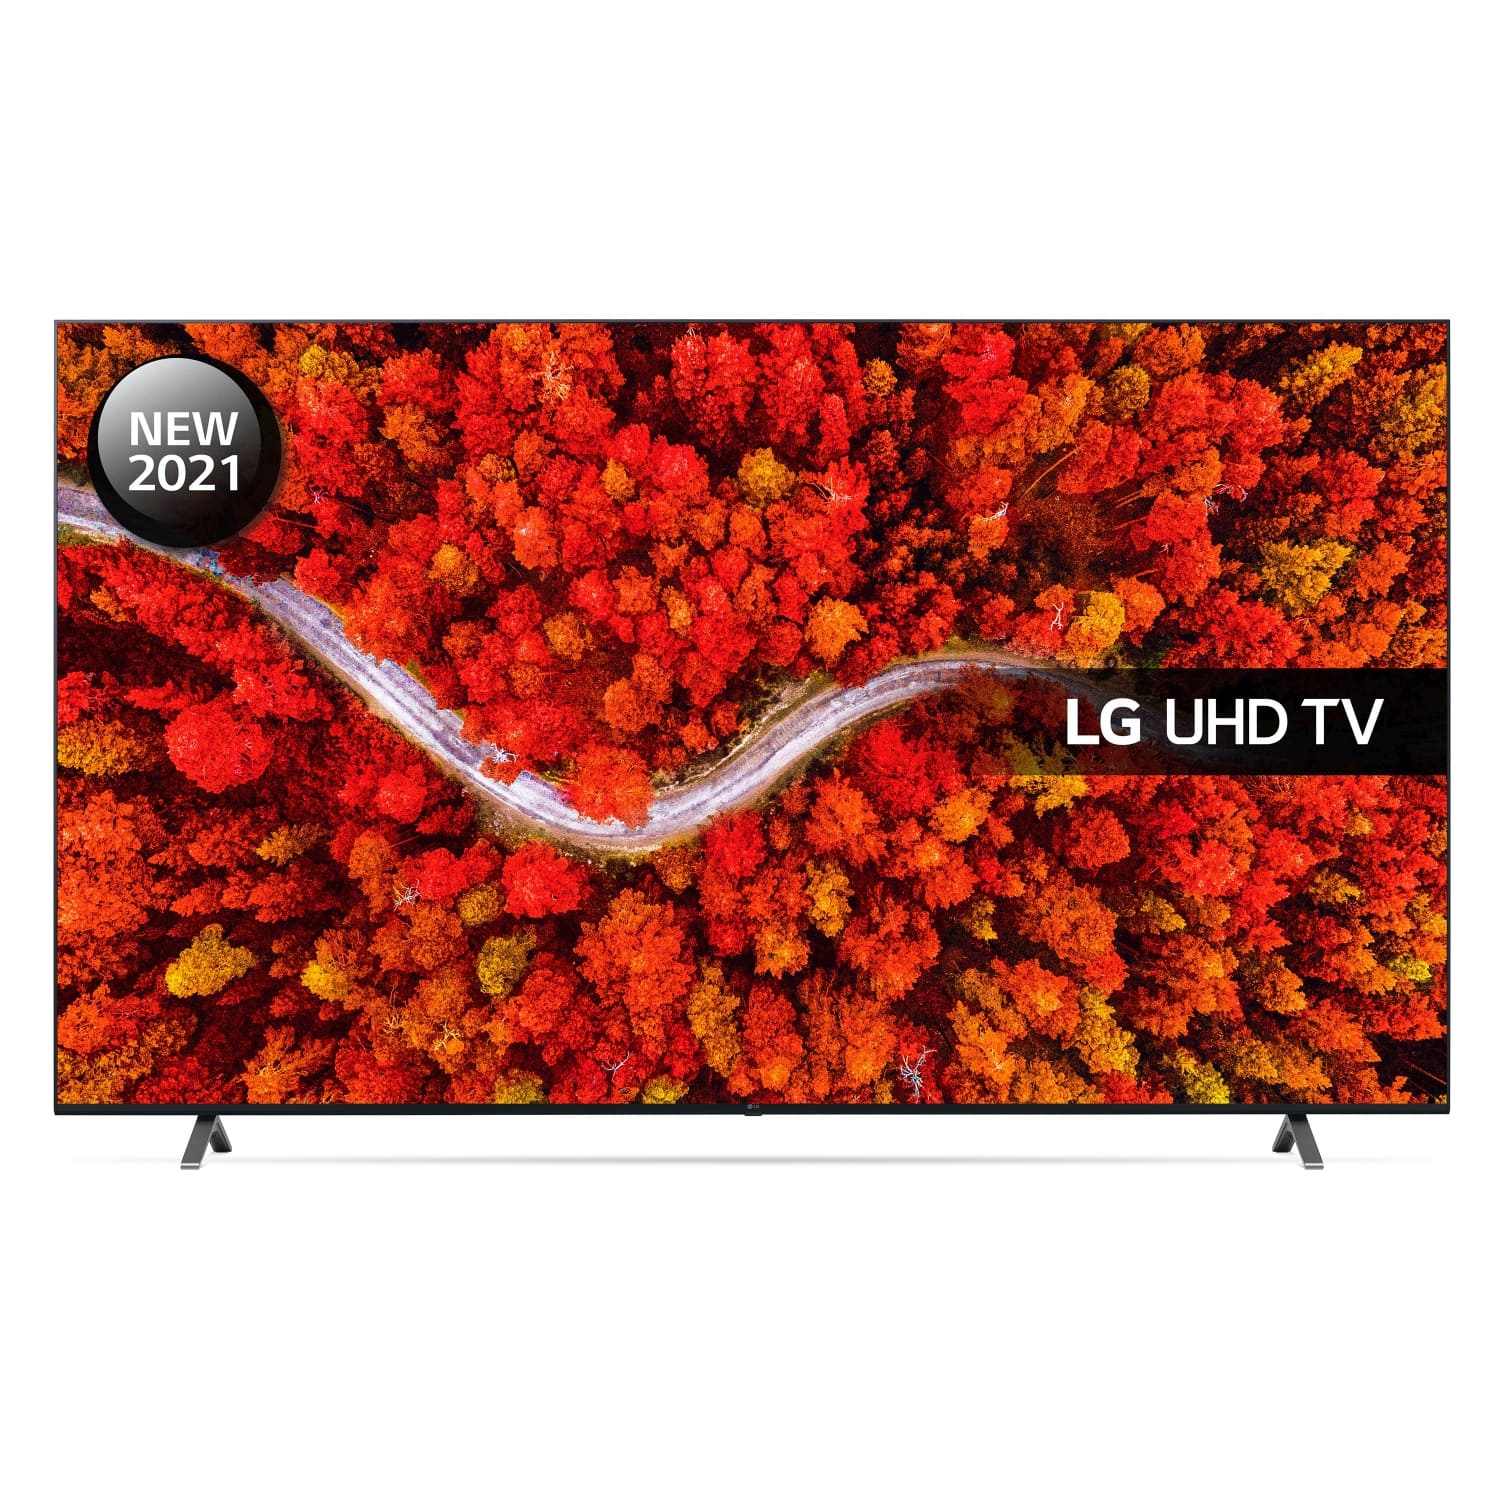 LG 82UP80006LA 82" 4K UHD LED Smart TV with Freeview Play - 0